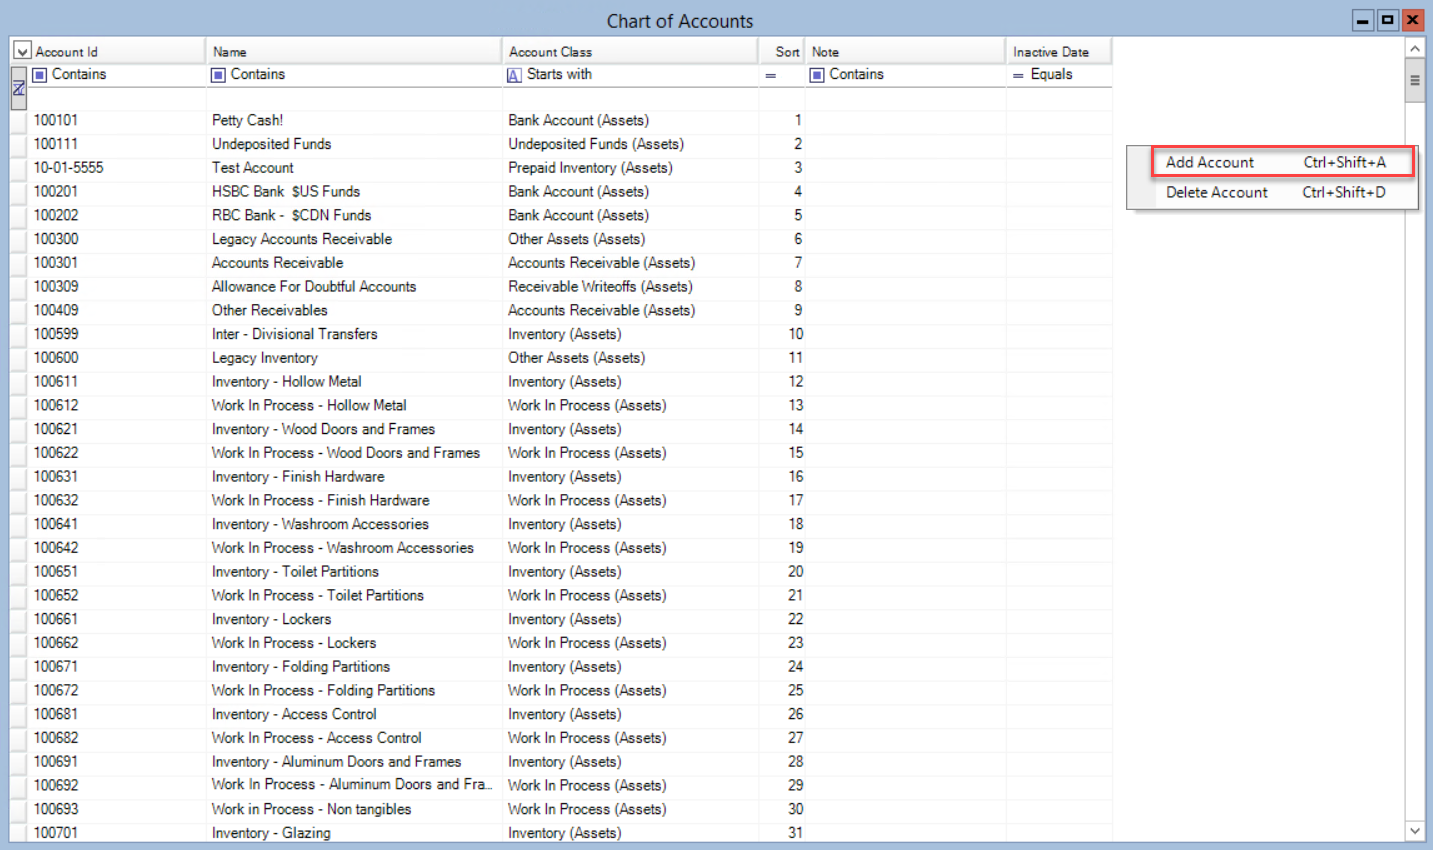 Chart of Accounts window; shows right click menu and add new account.